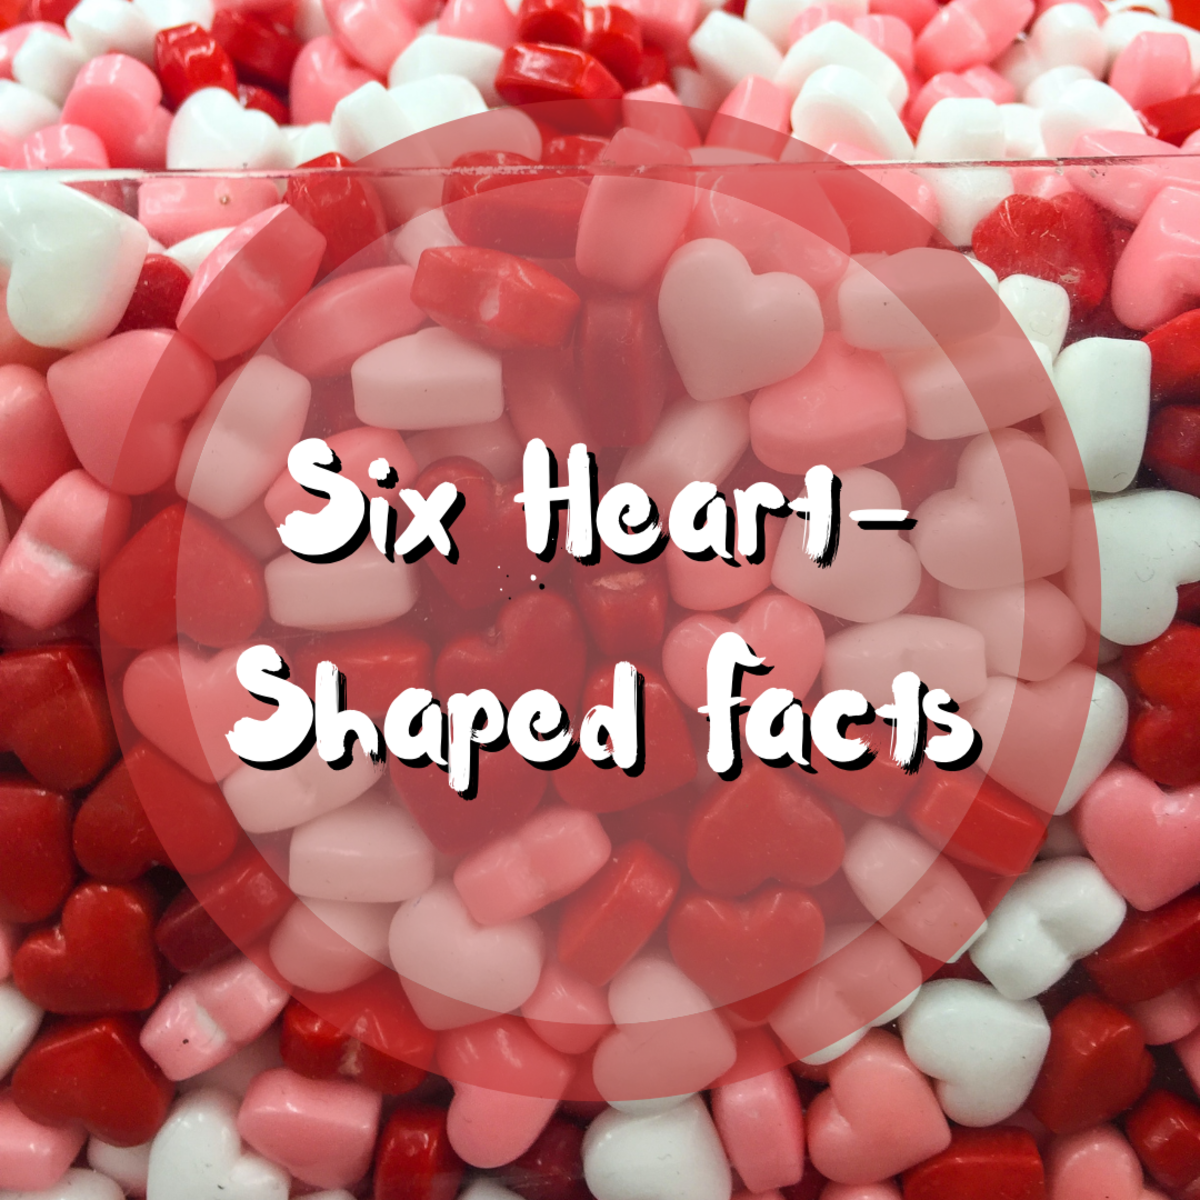 In this article, you will learn six interesting and unusual facts that are "heart-shaped."